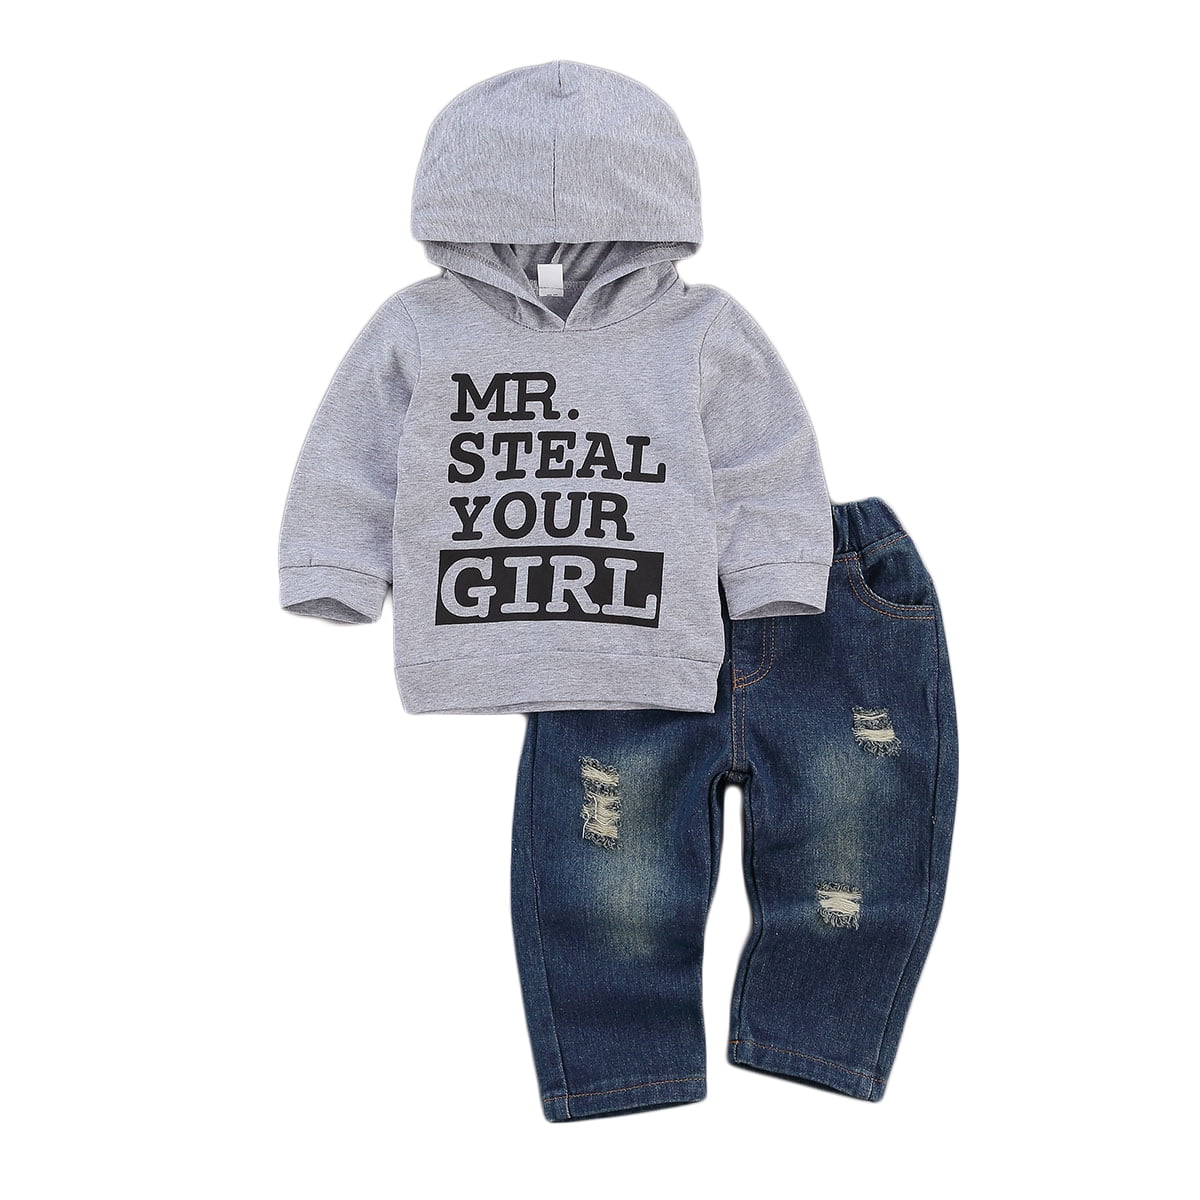 Toddler Baby Boy Outfits Hoodie Sweatshirts & Jeans Clothes Set Fall Winter 6 9 12 18 24 Months